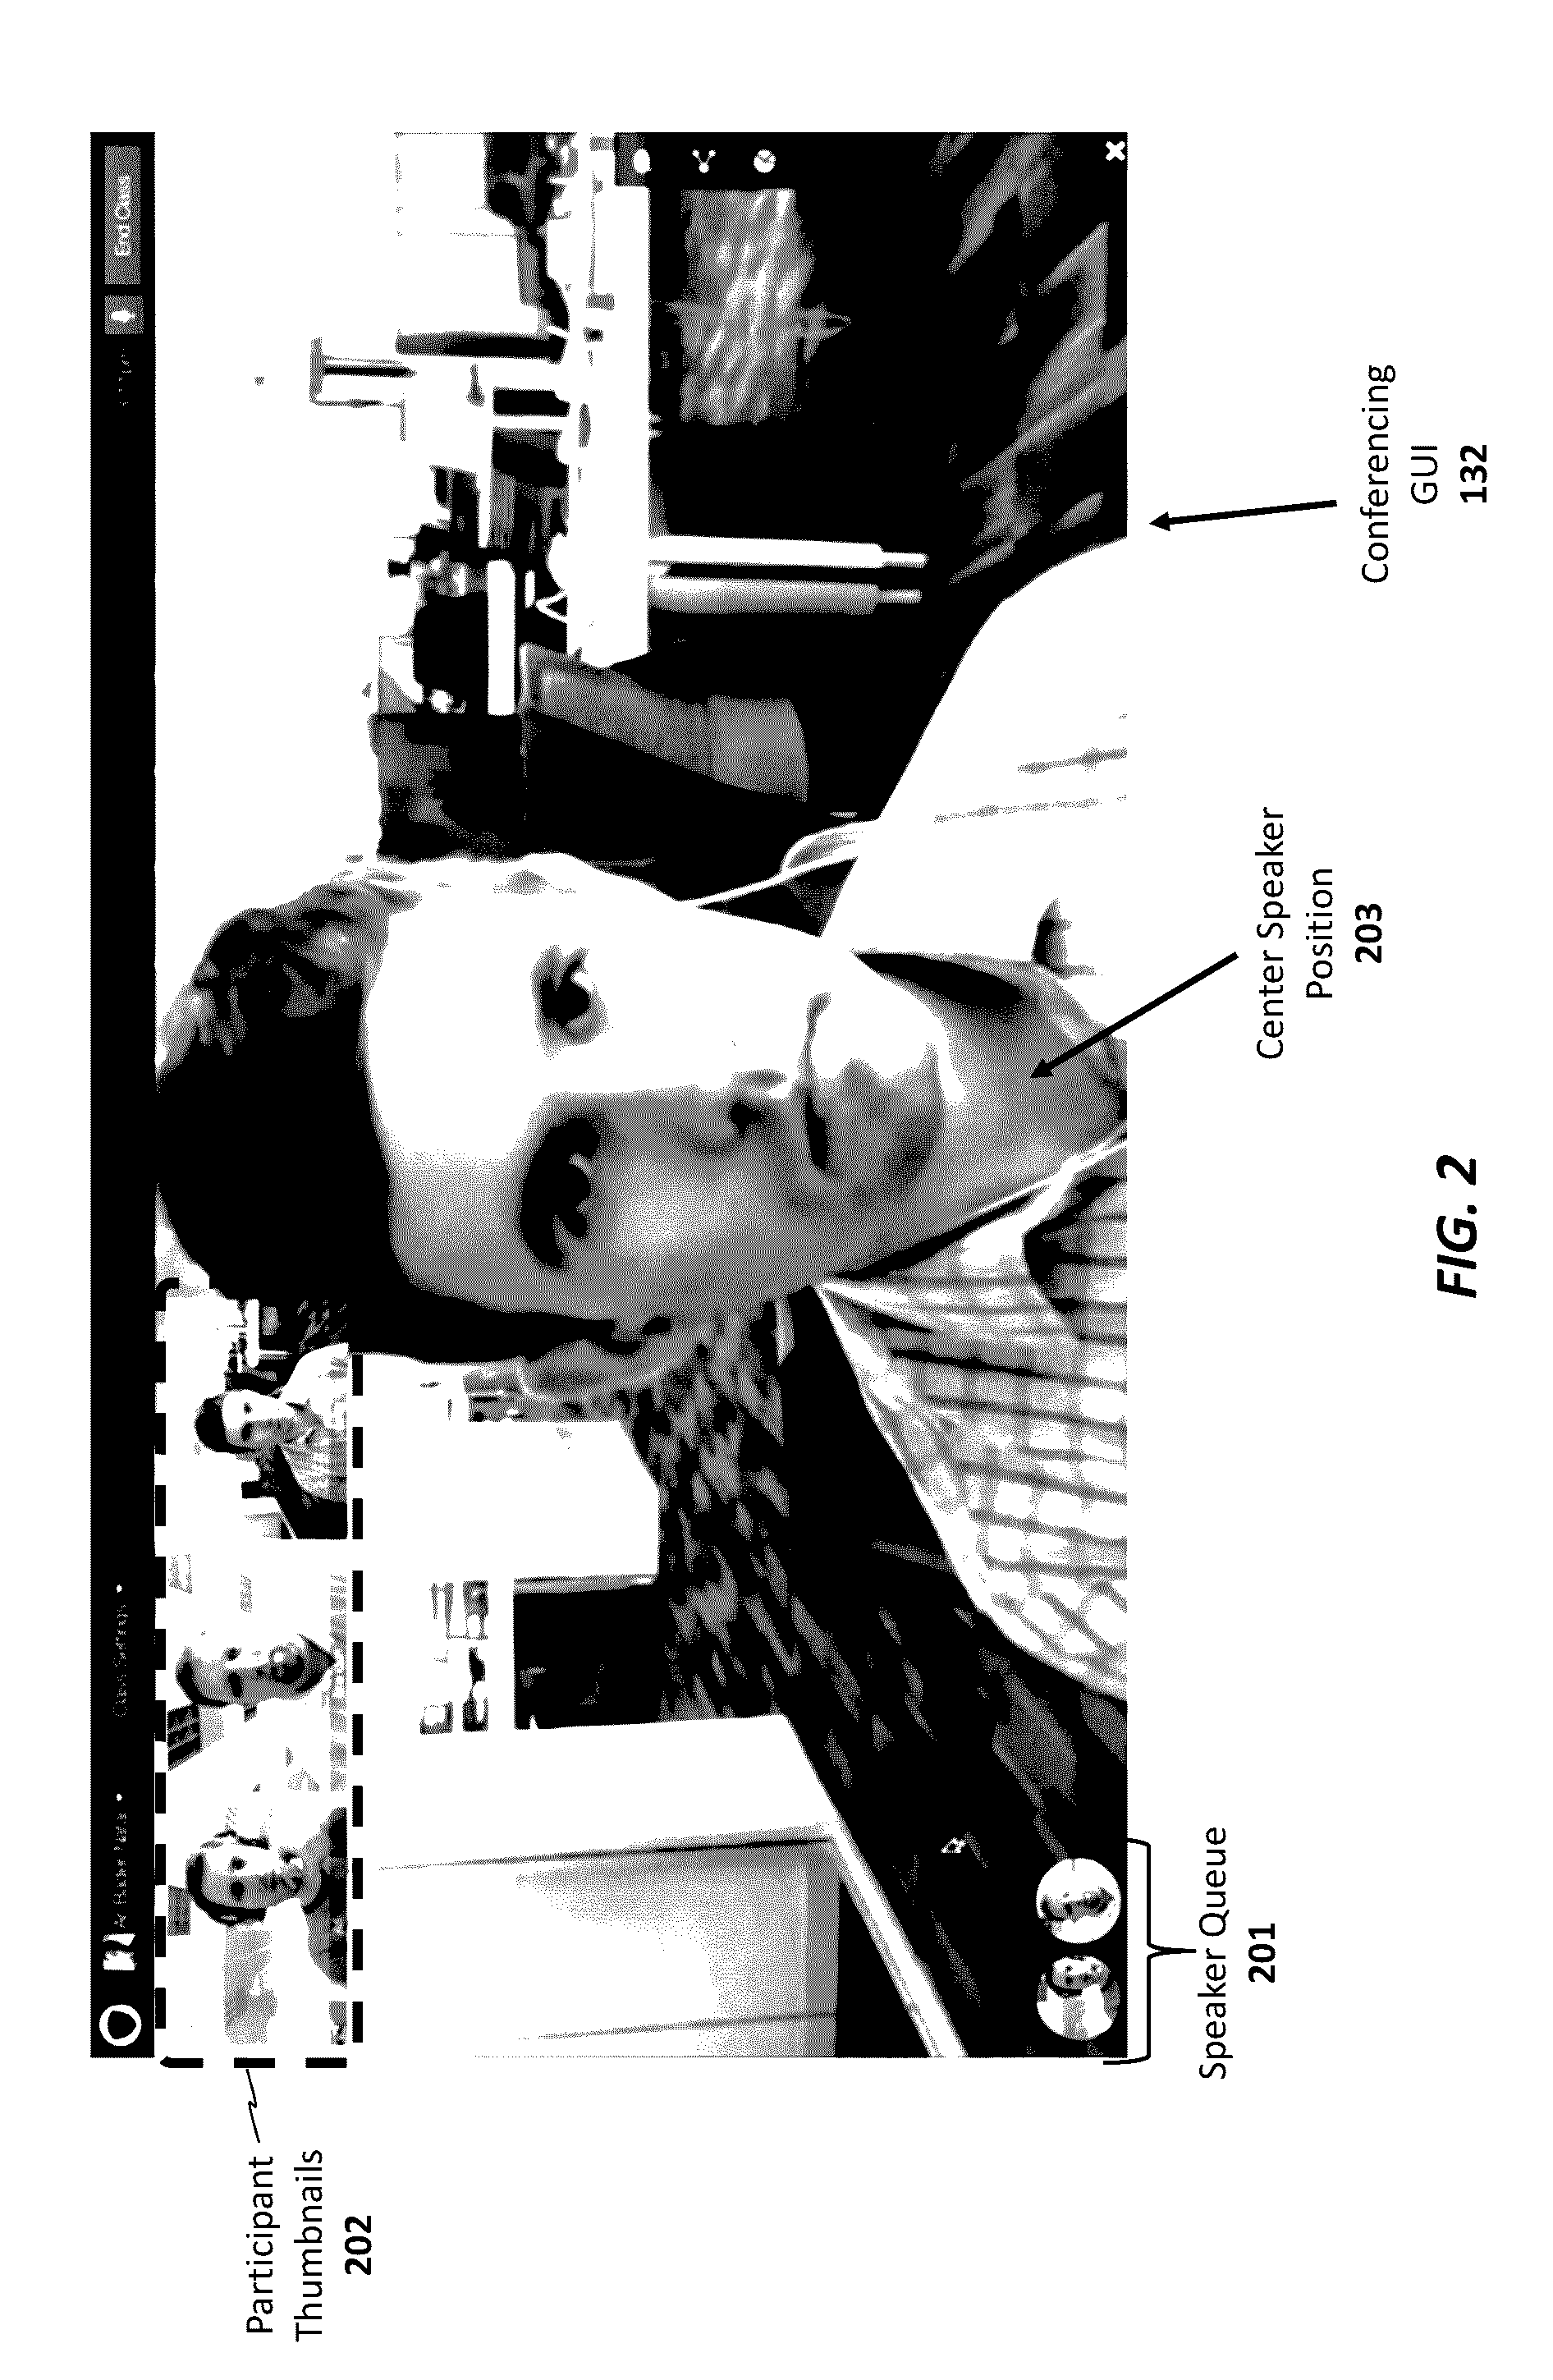 System and method for decision support in a virtual conference